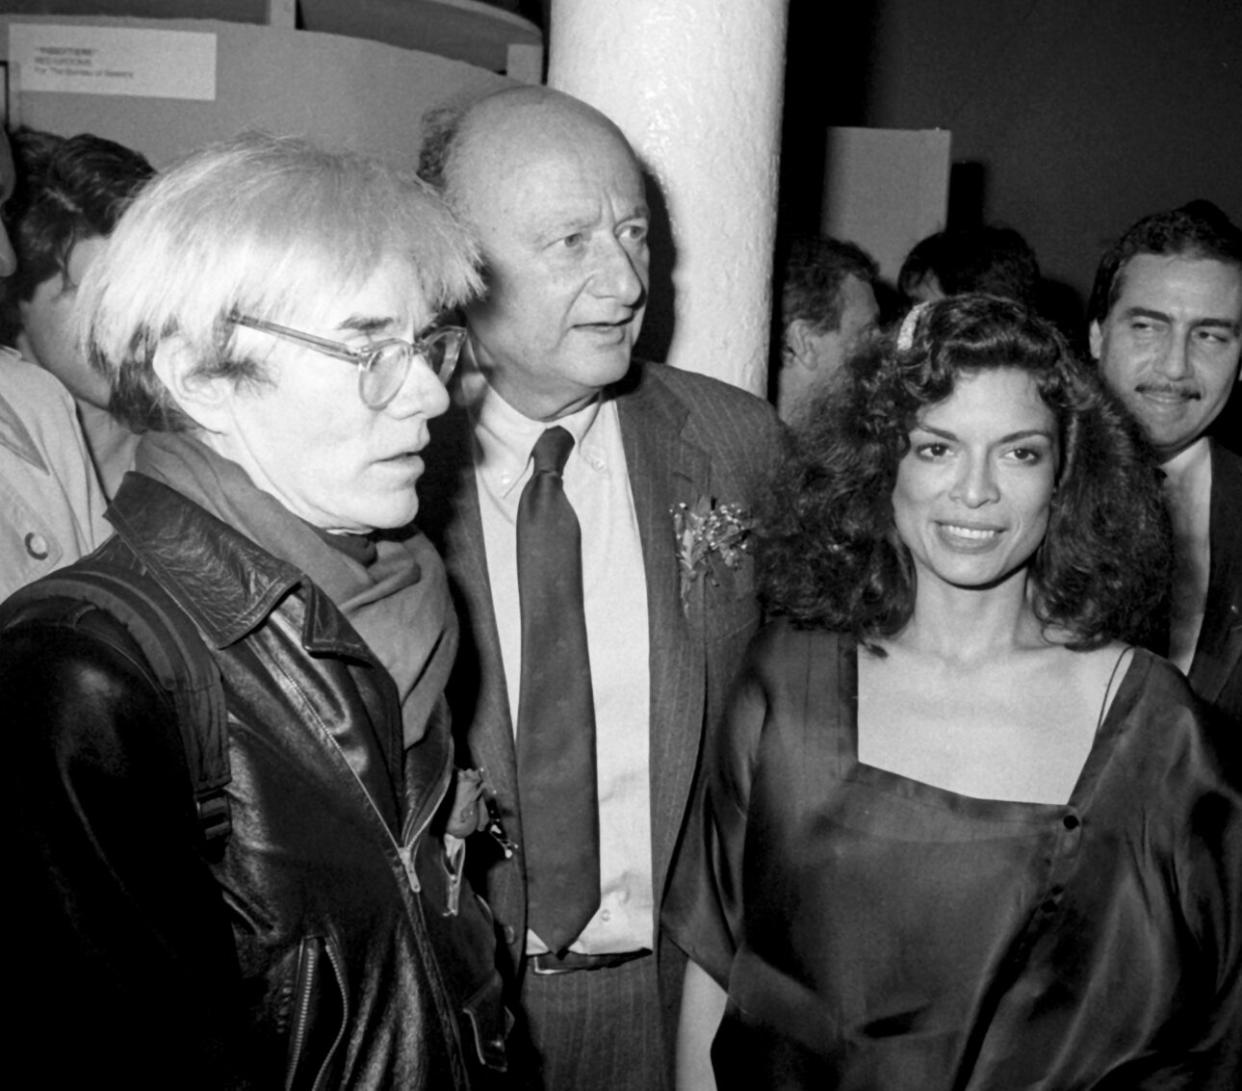 Polaroid philosopher Andy Warhol, city mayor Ed Koch, and Rolling Stones wife Bianca Jagger at Area Nightclub, New York City, 1984. (Credit: Ron Galella/Ron Galella Collection via Getty Images)